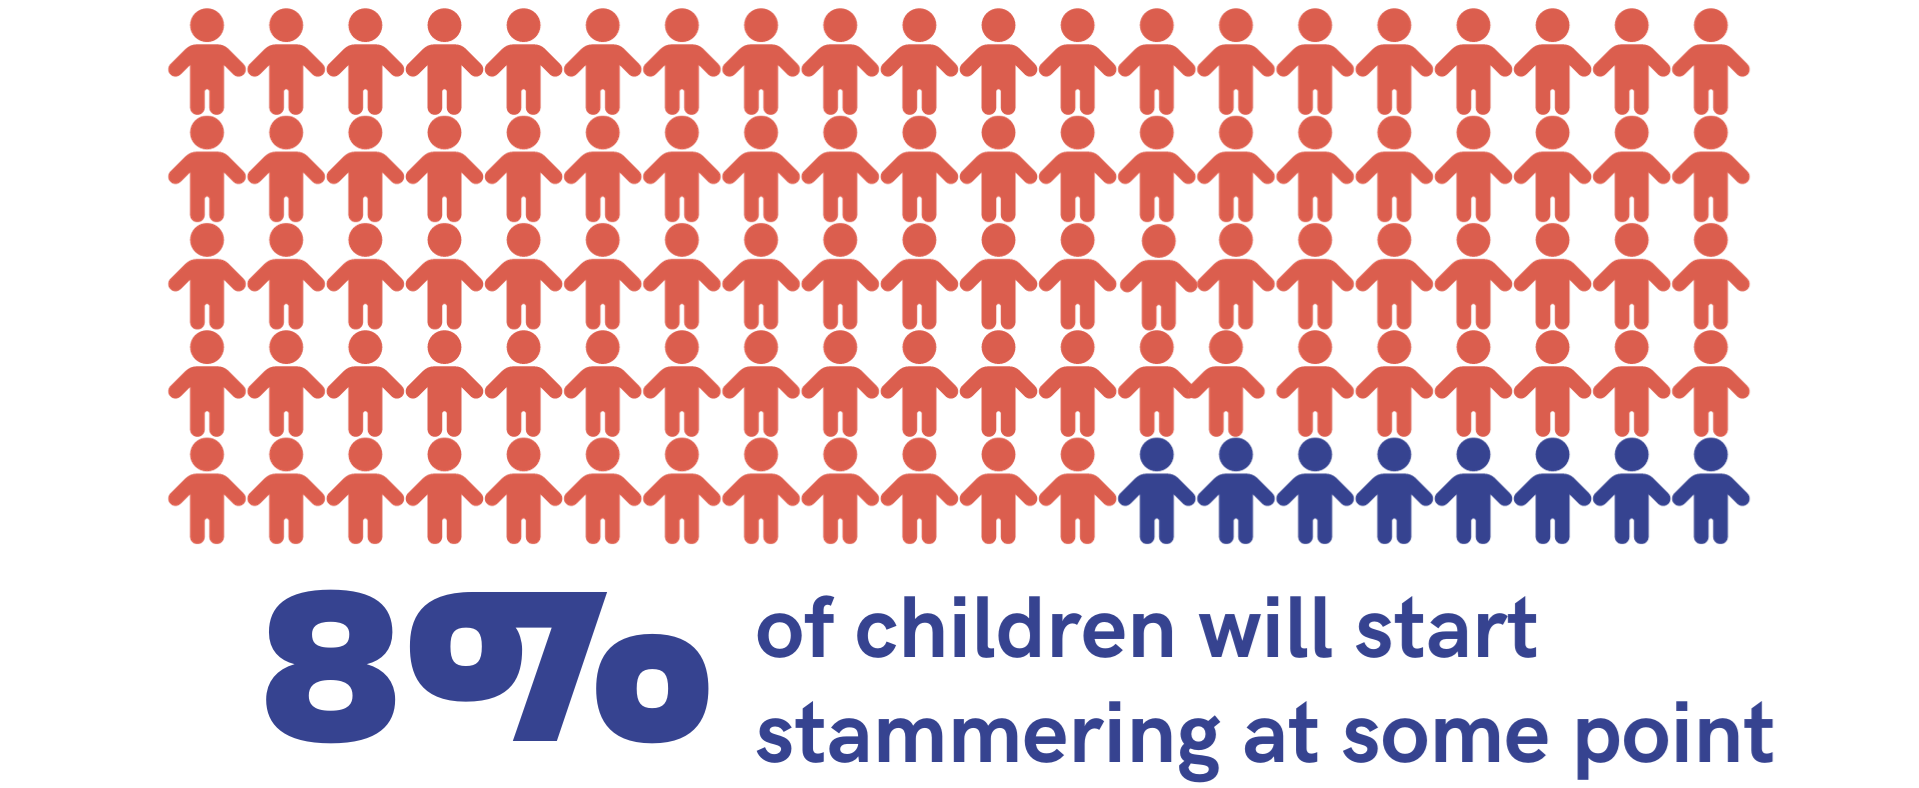 An infographic showing 100 children, with eight of them shaded a different colour, above the text '8% of children will start stammering at some point'.